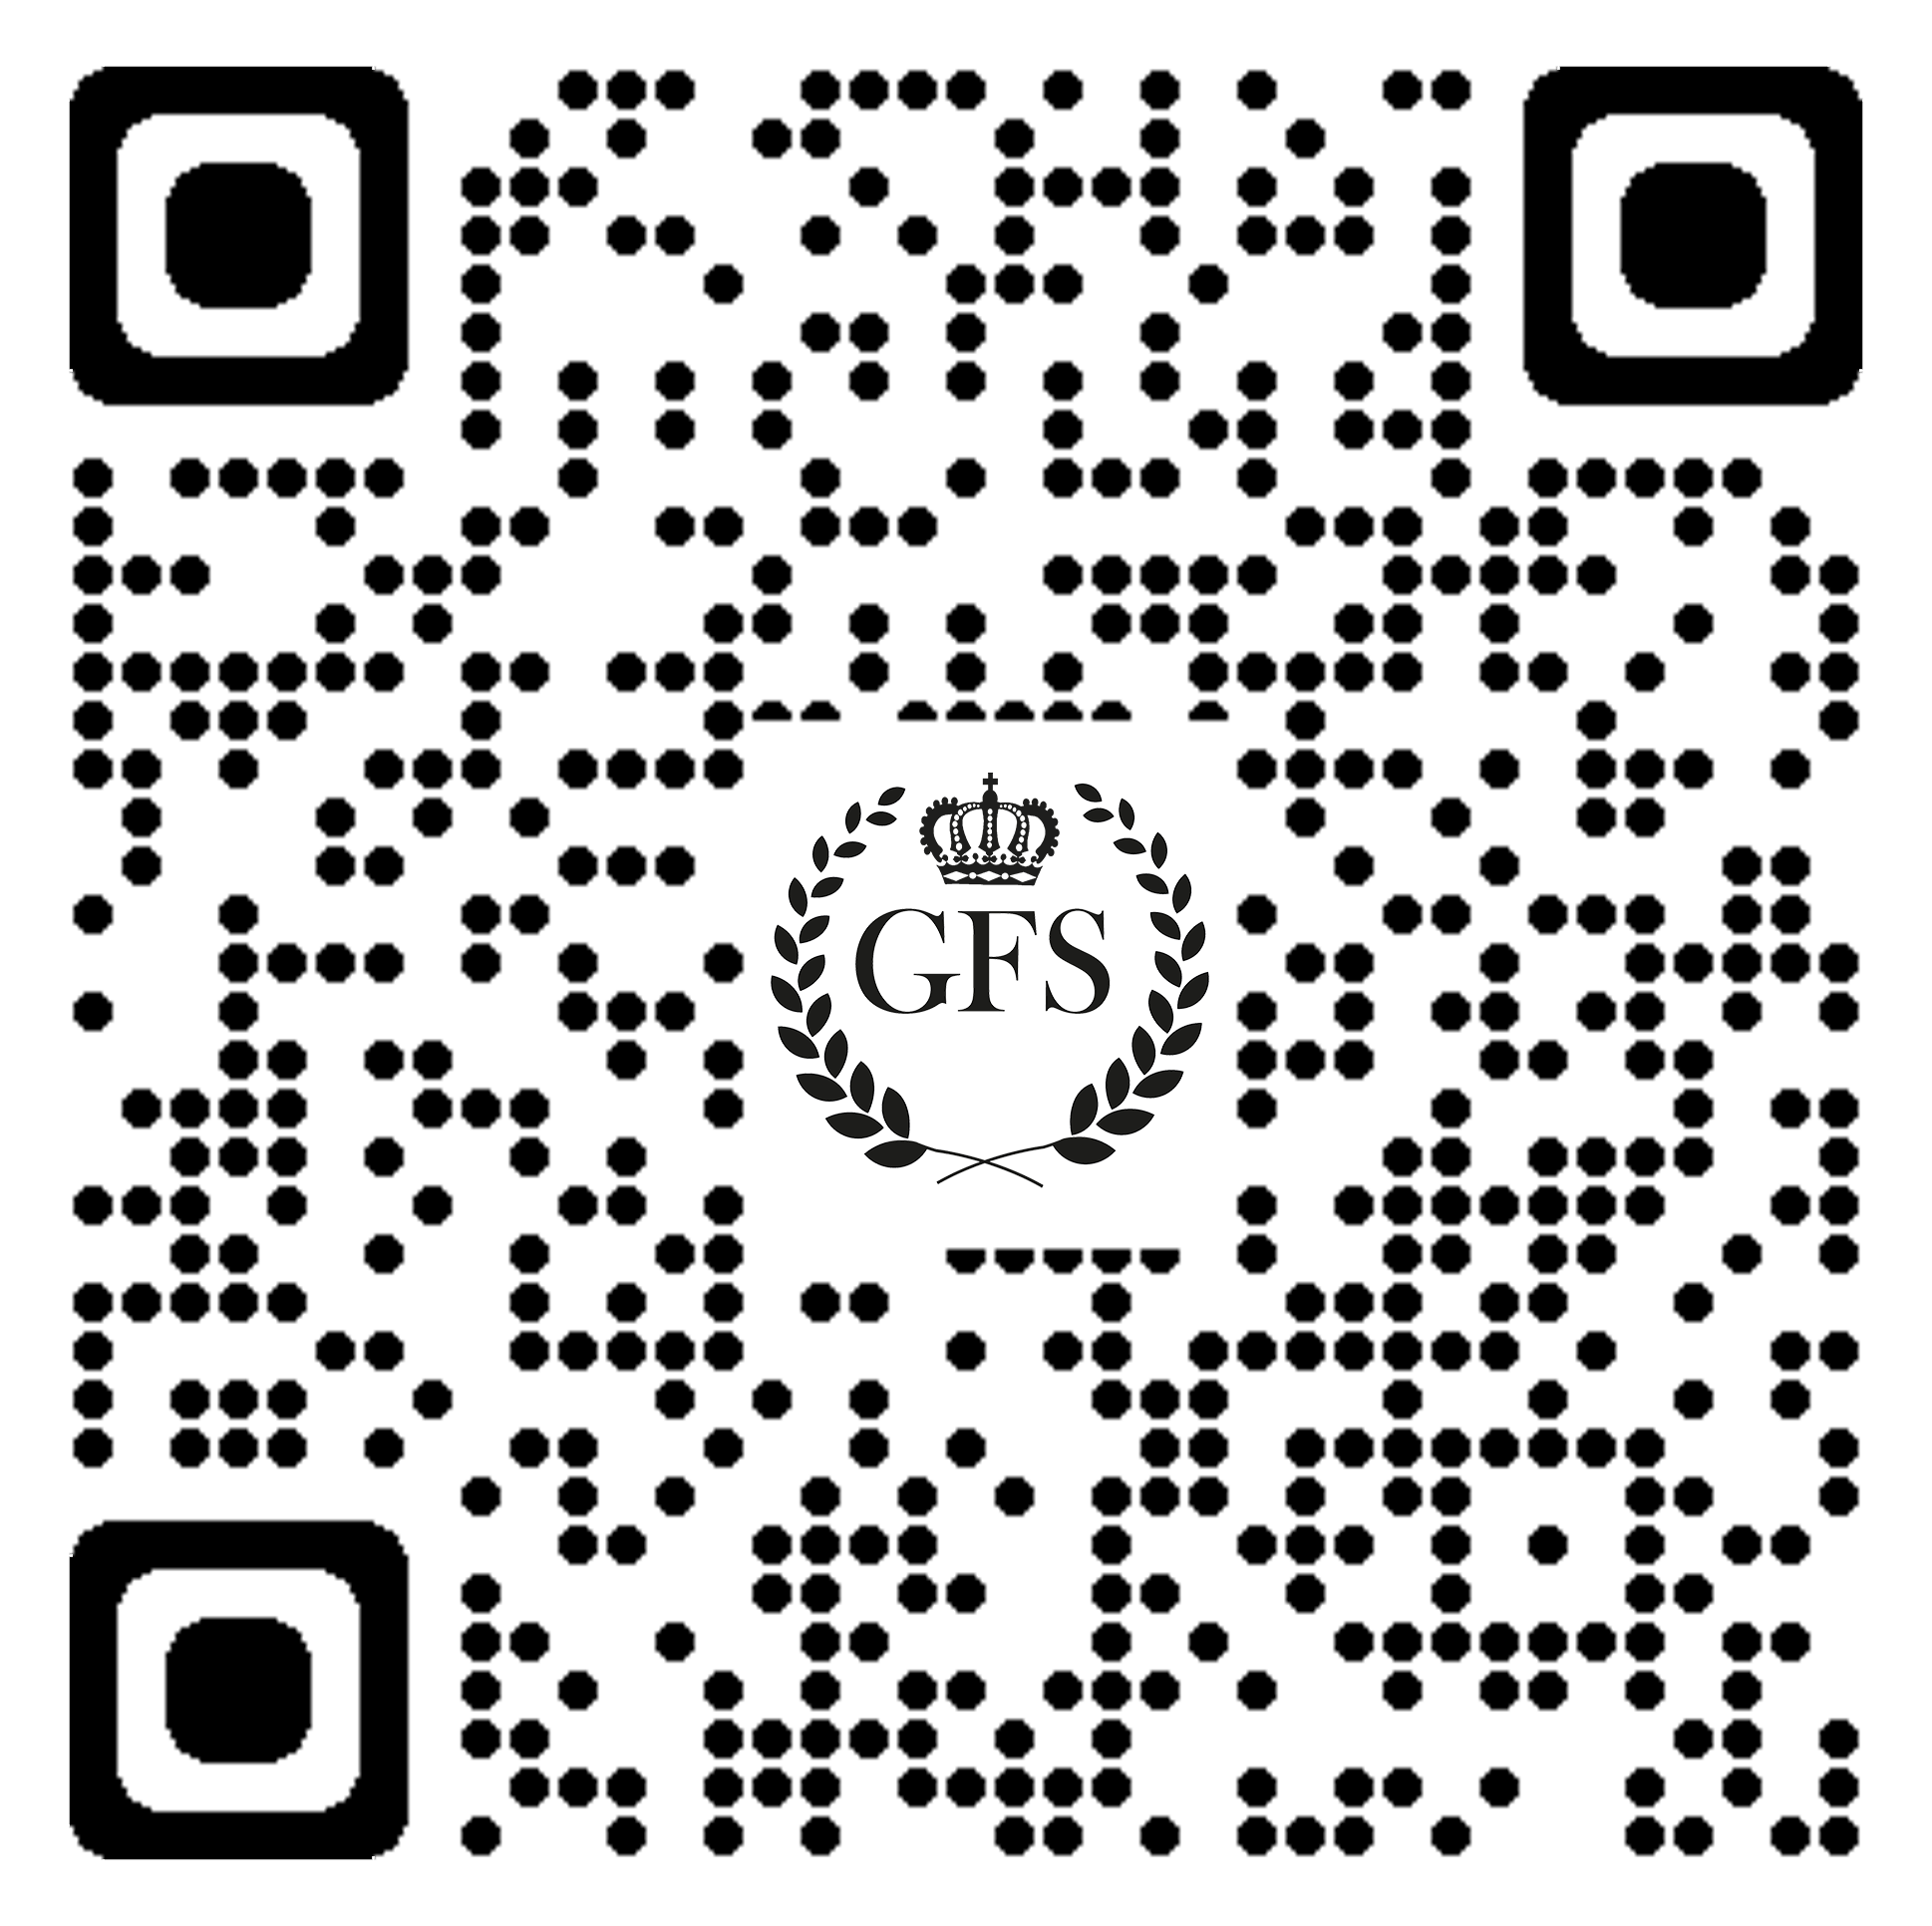 image of the qr code which leads to the site app.html where you can find further information about downloading the new GFS application for your phone